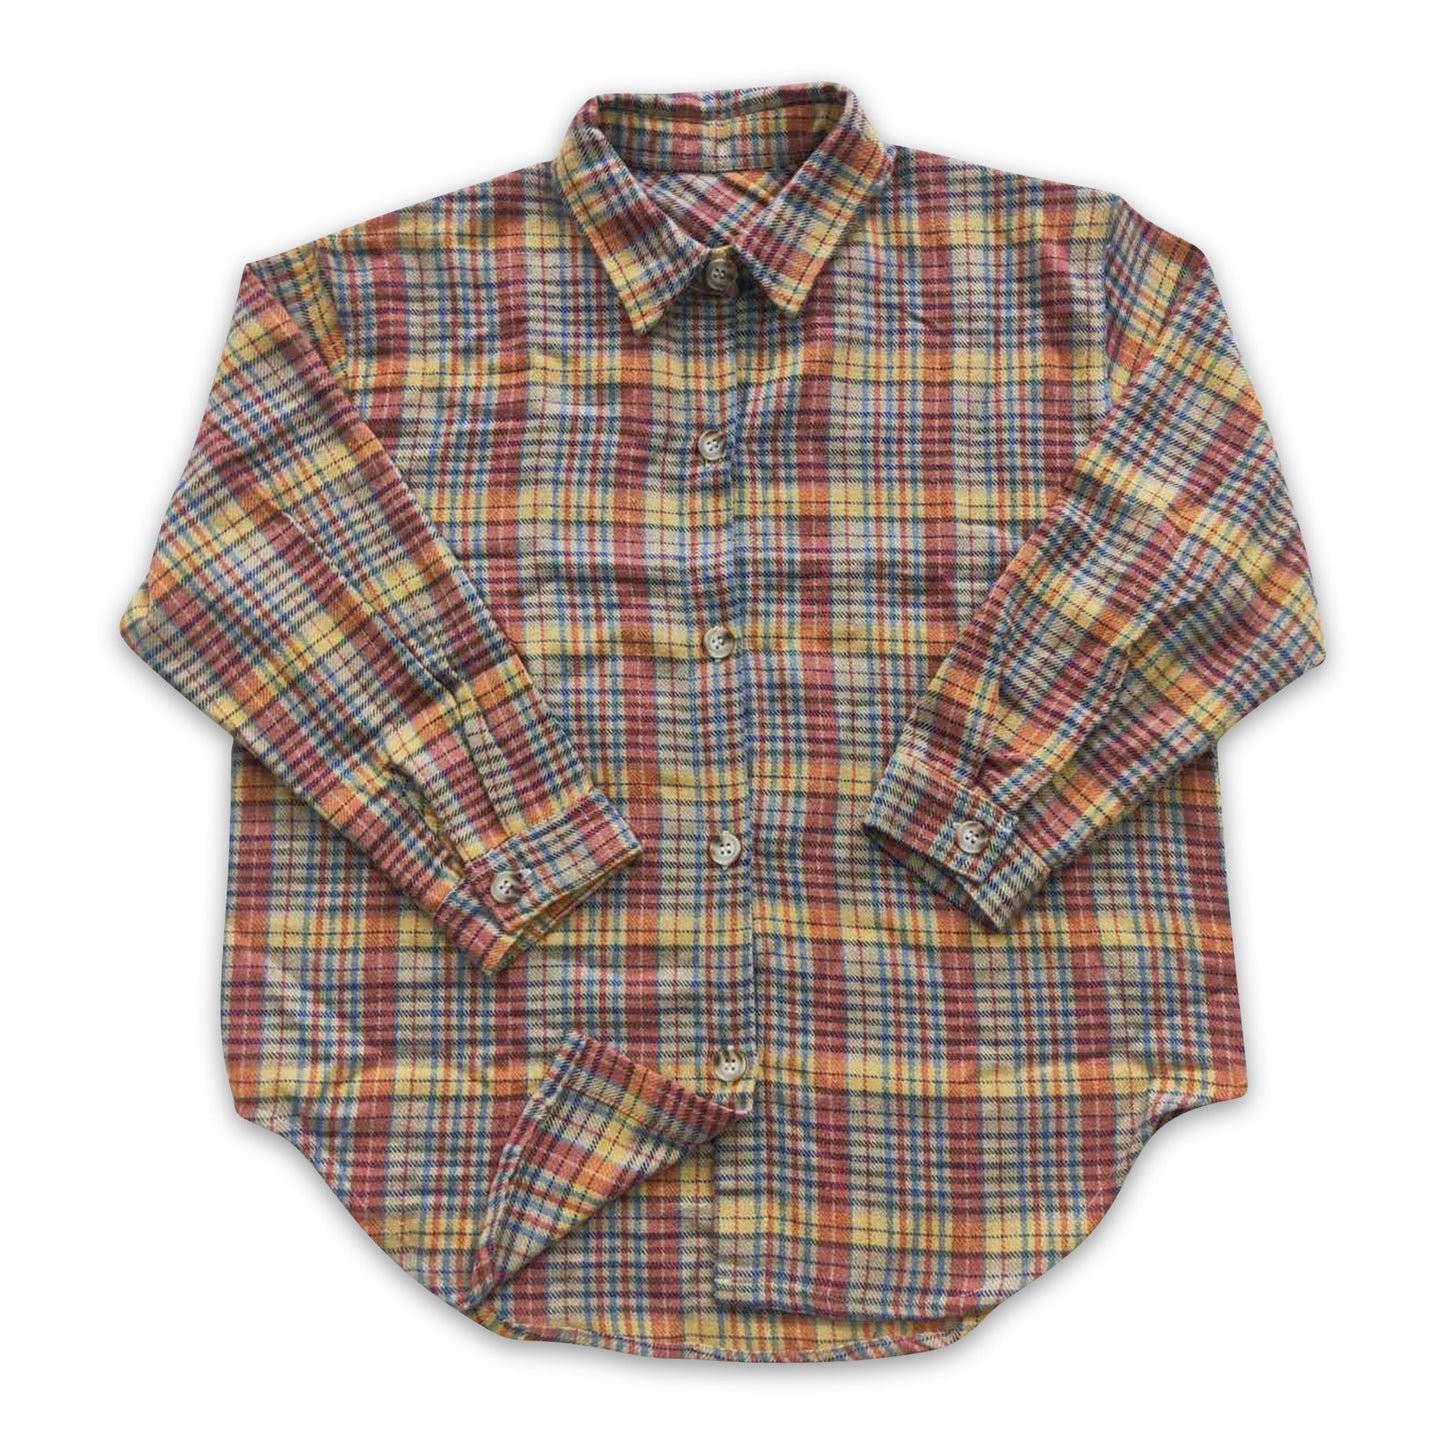 Plaid long sleeves fall kids boy button up flannel